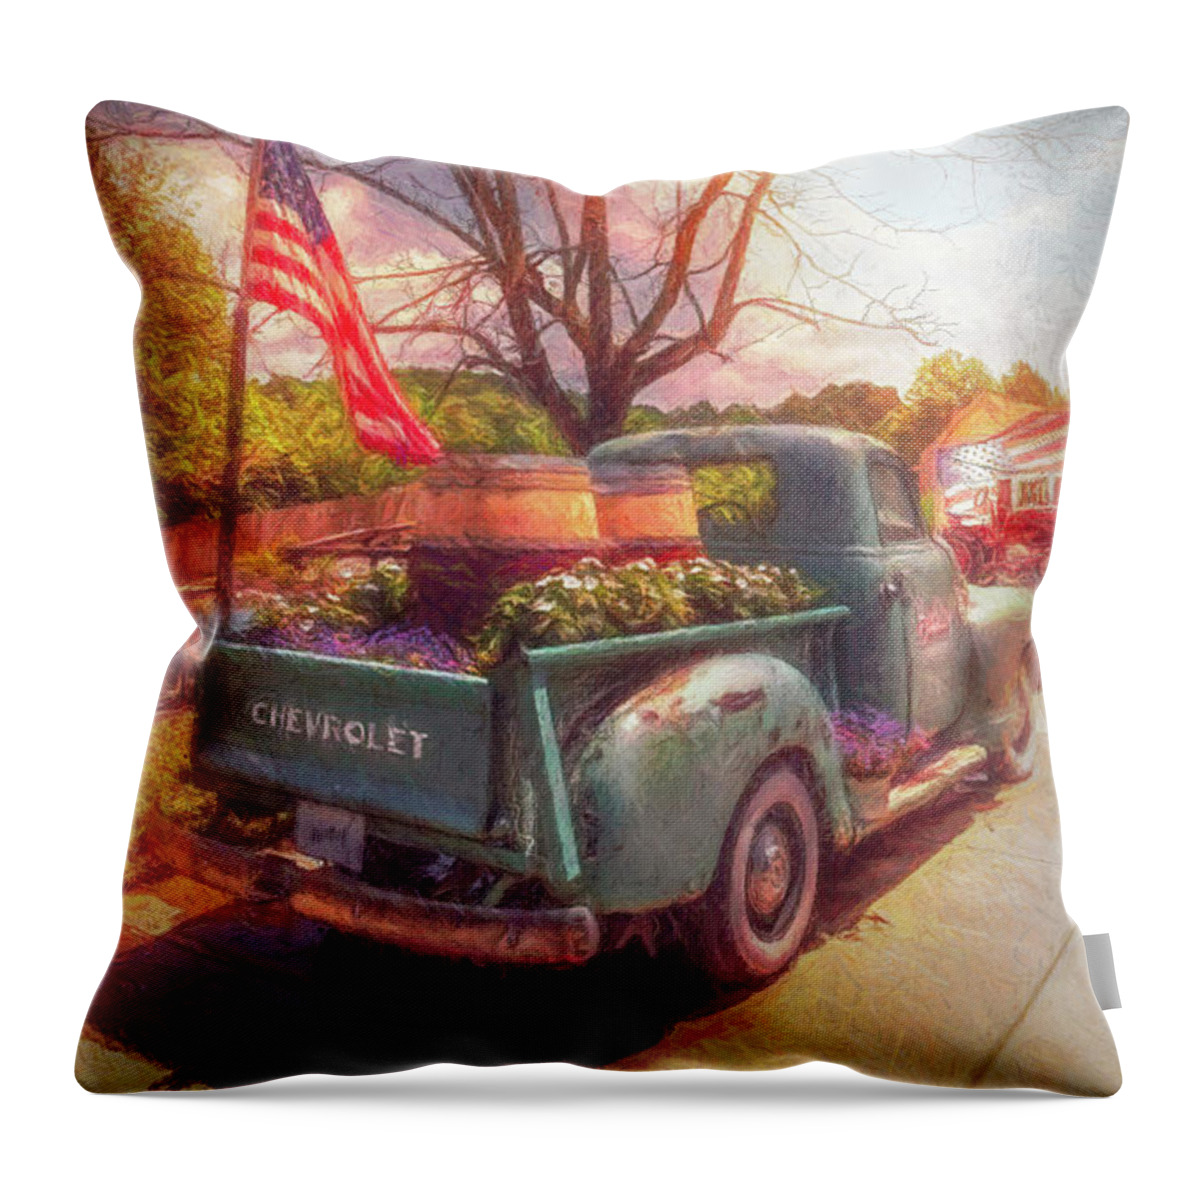 Truck Throw Pillow featuring the photograph Vintage Chevrolet at Buckley Vineyards Painting by Debra and Dave Vanderlaan